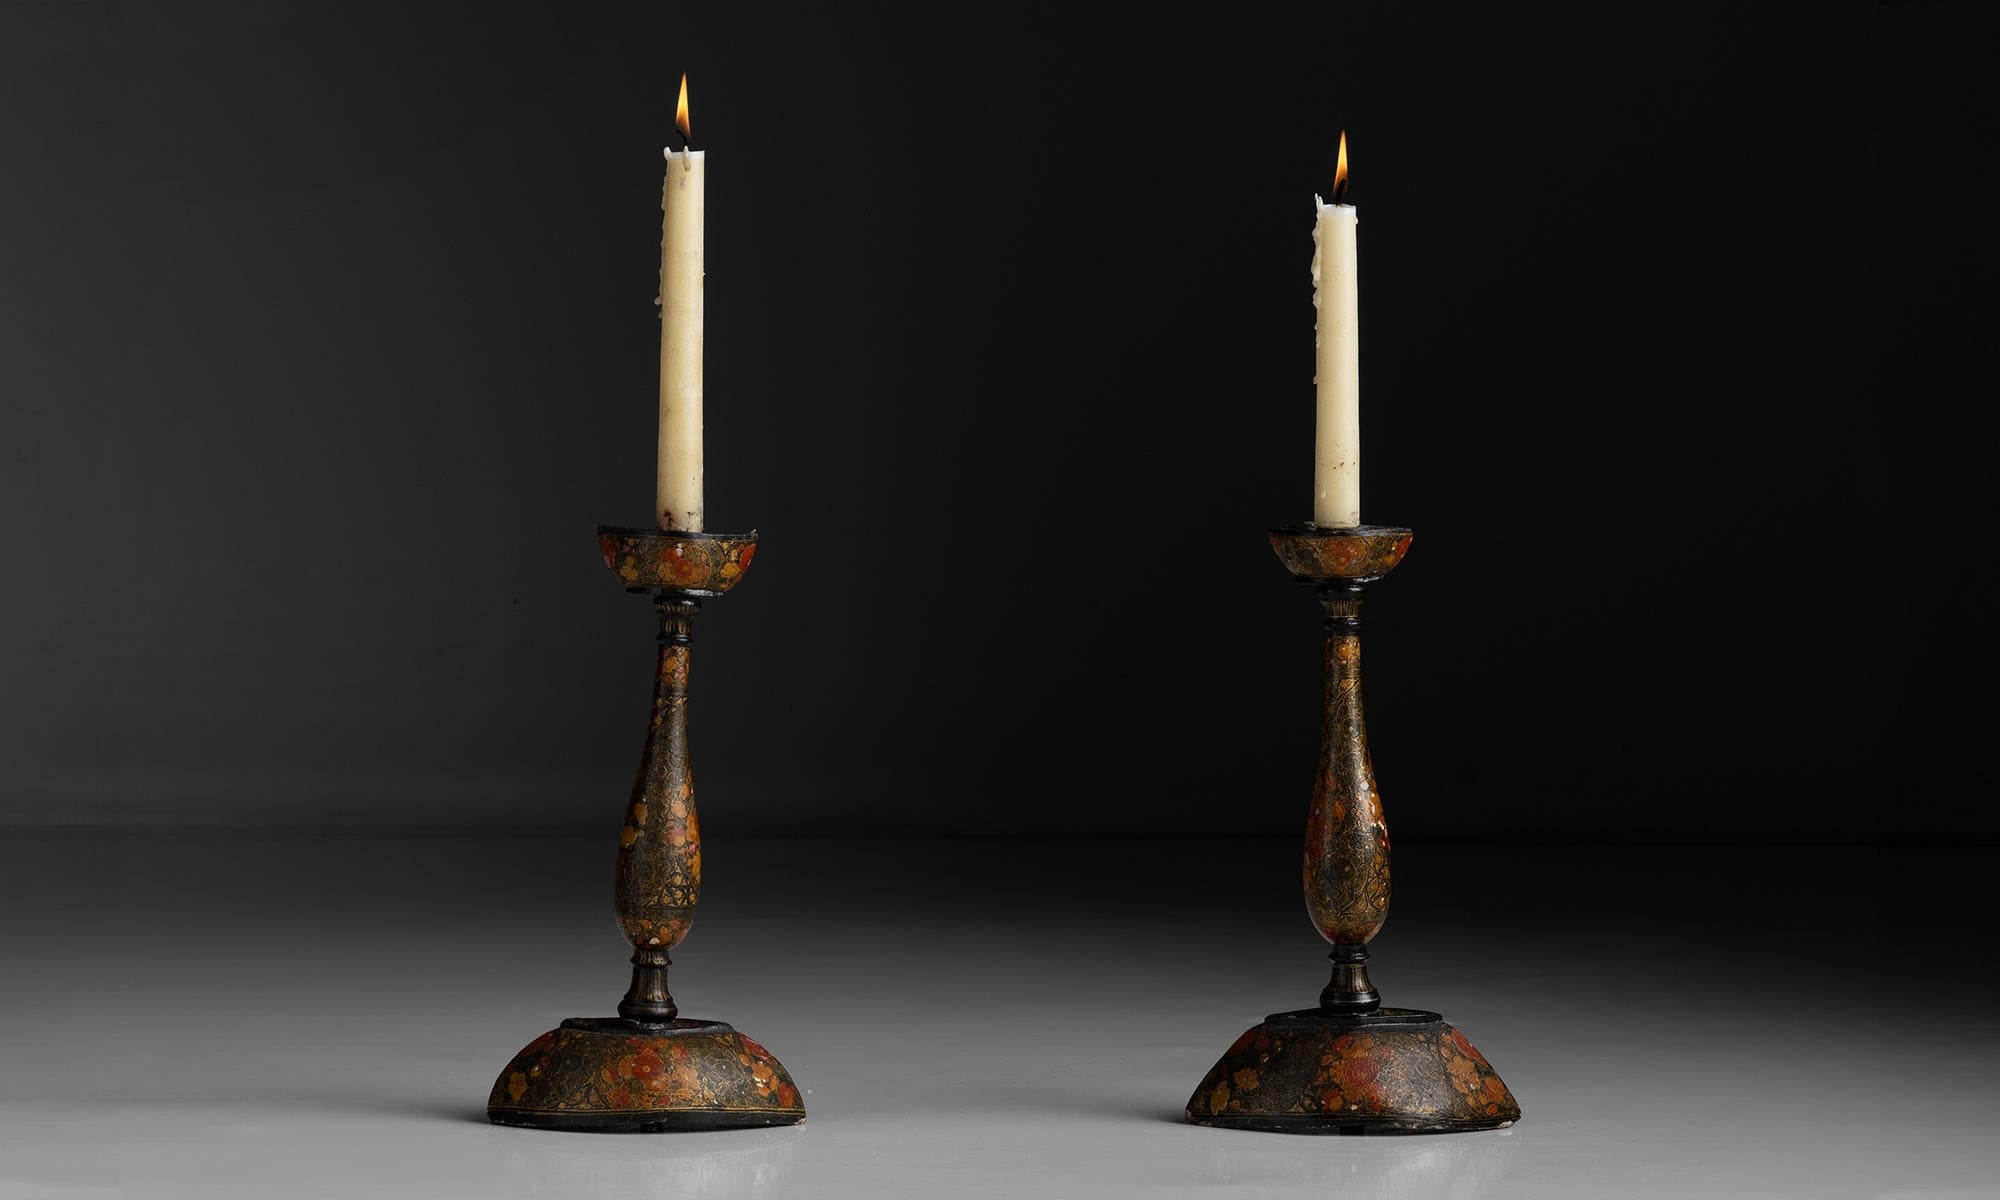 India circa 1910

Oblong shape. Carved wood and lacquer candlesticks with floral motif.

7”w x 4”d x 12”h